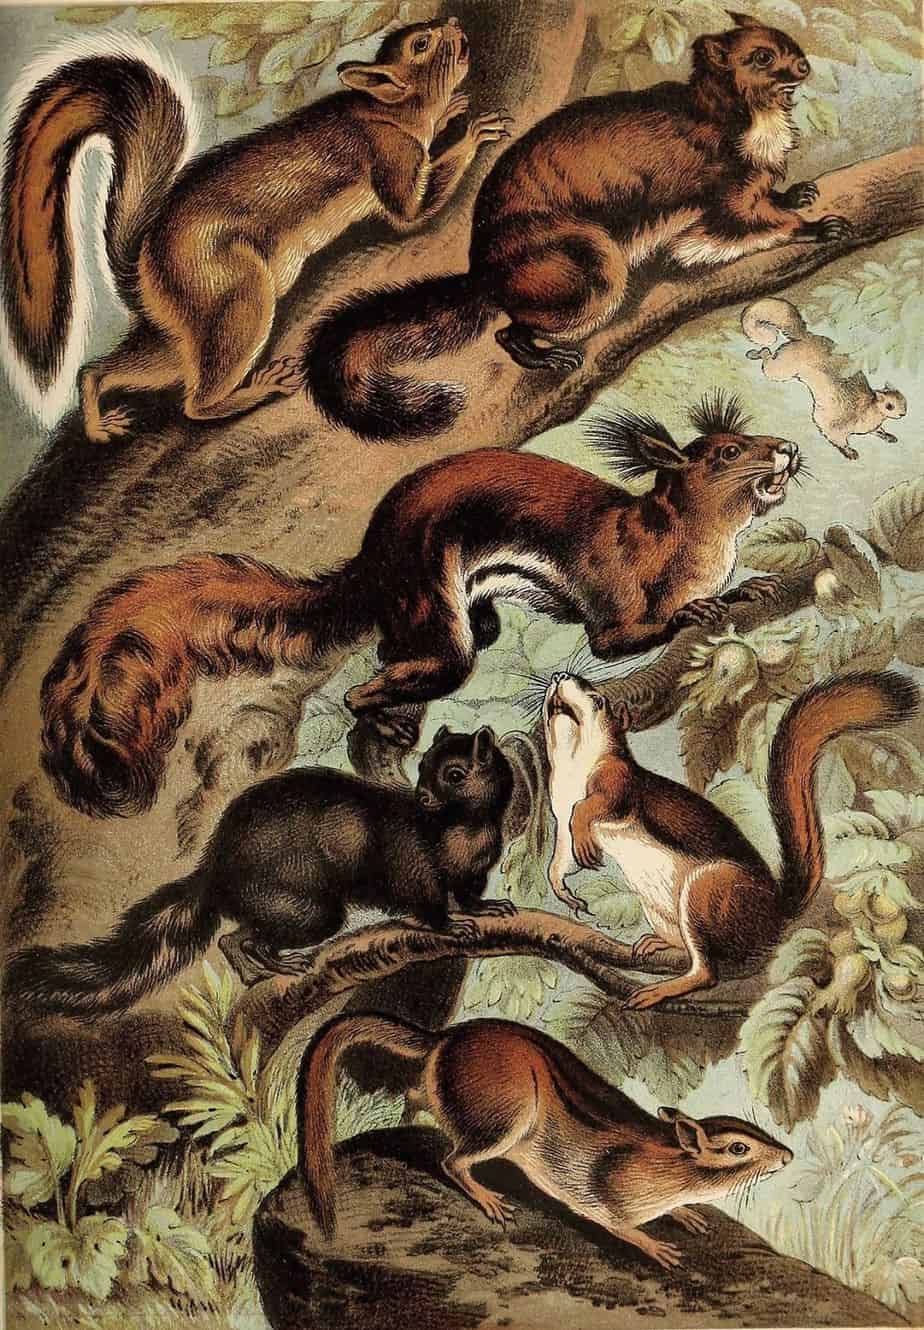 Illustration from Johnson's Household Book of Nature (1880) squirrels